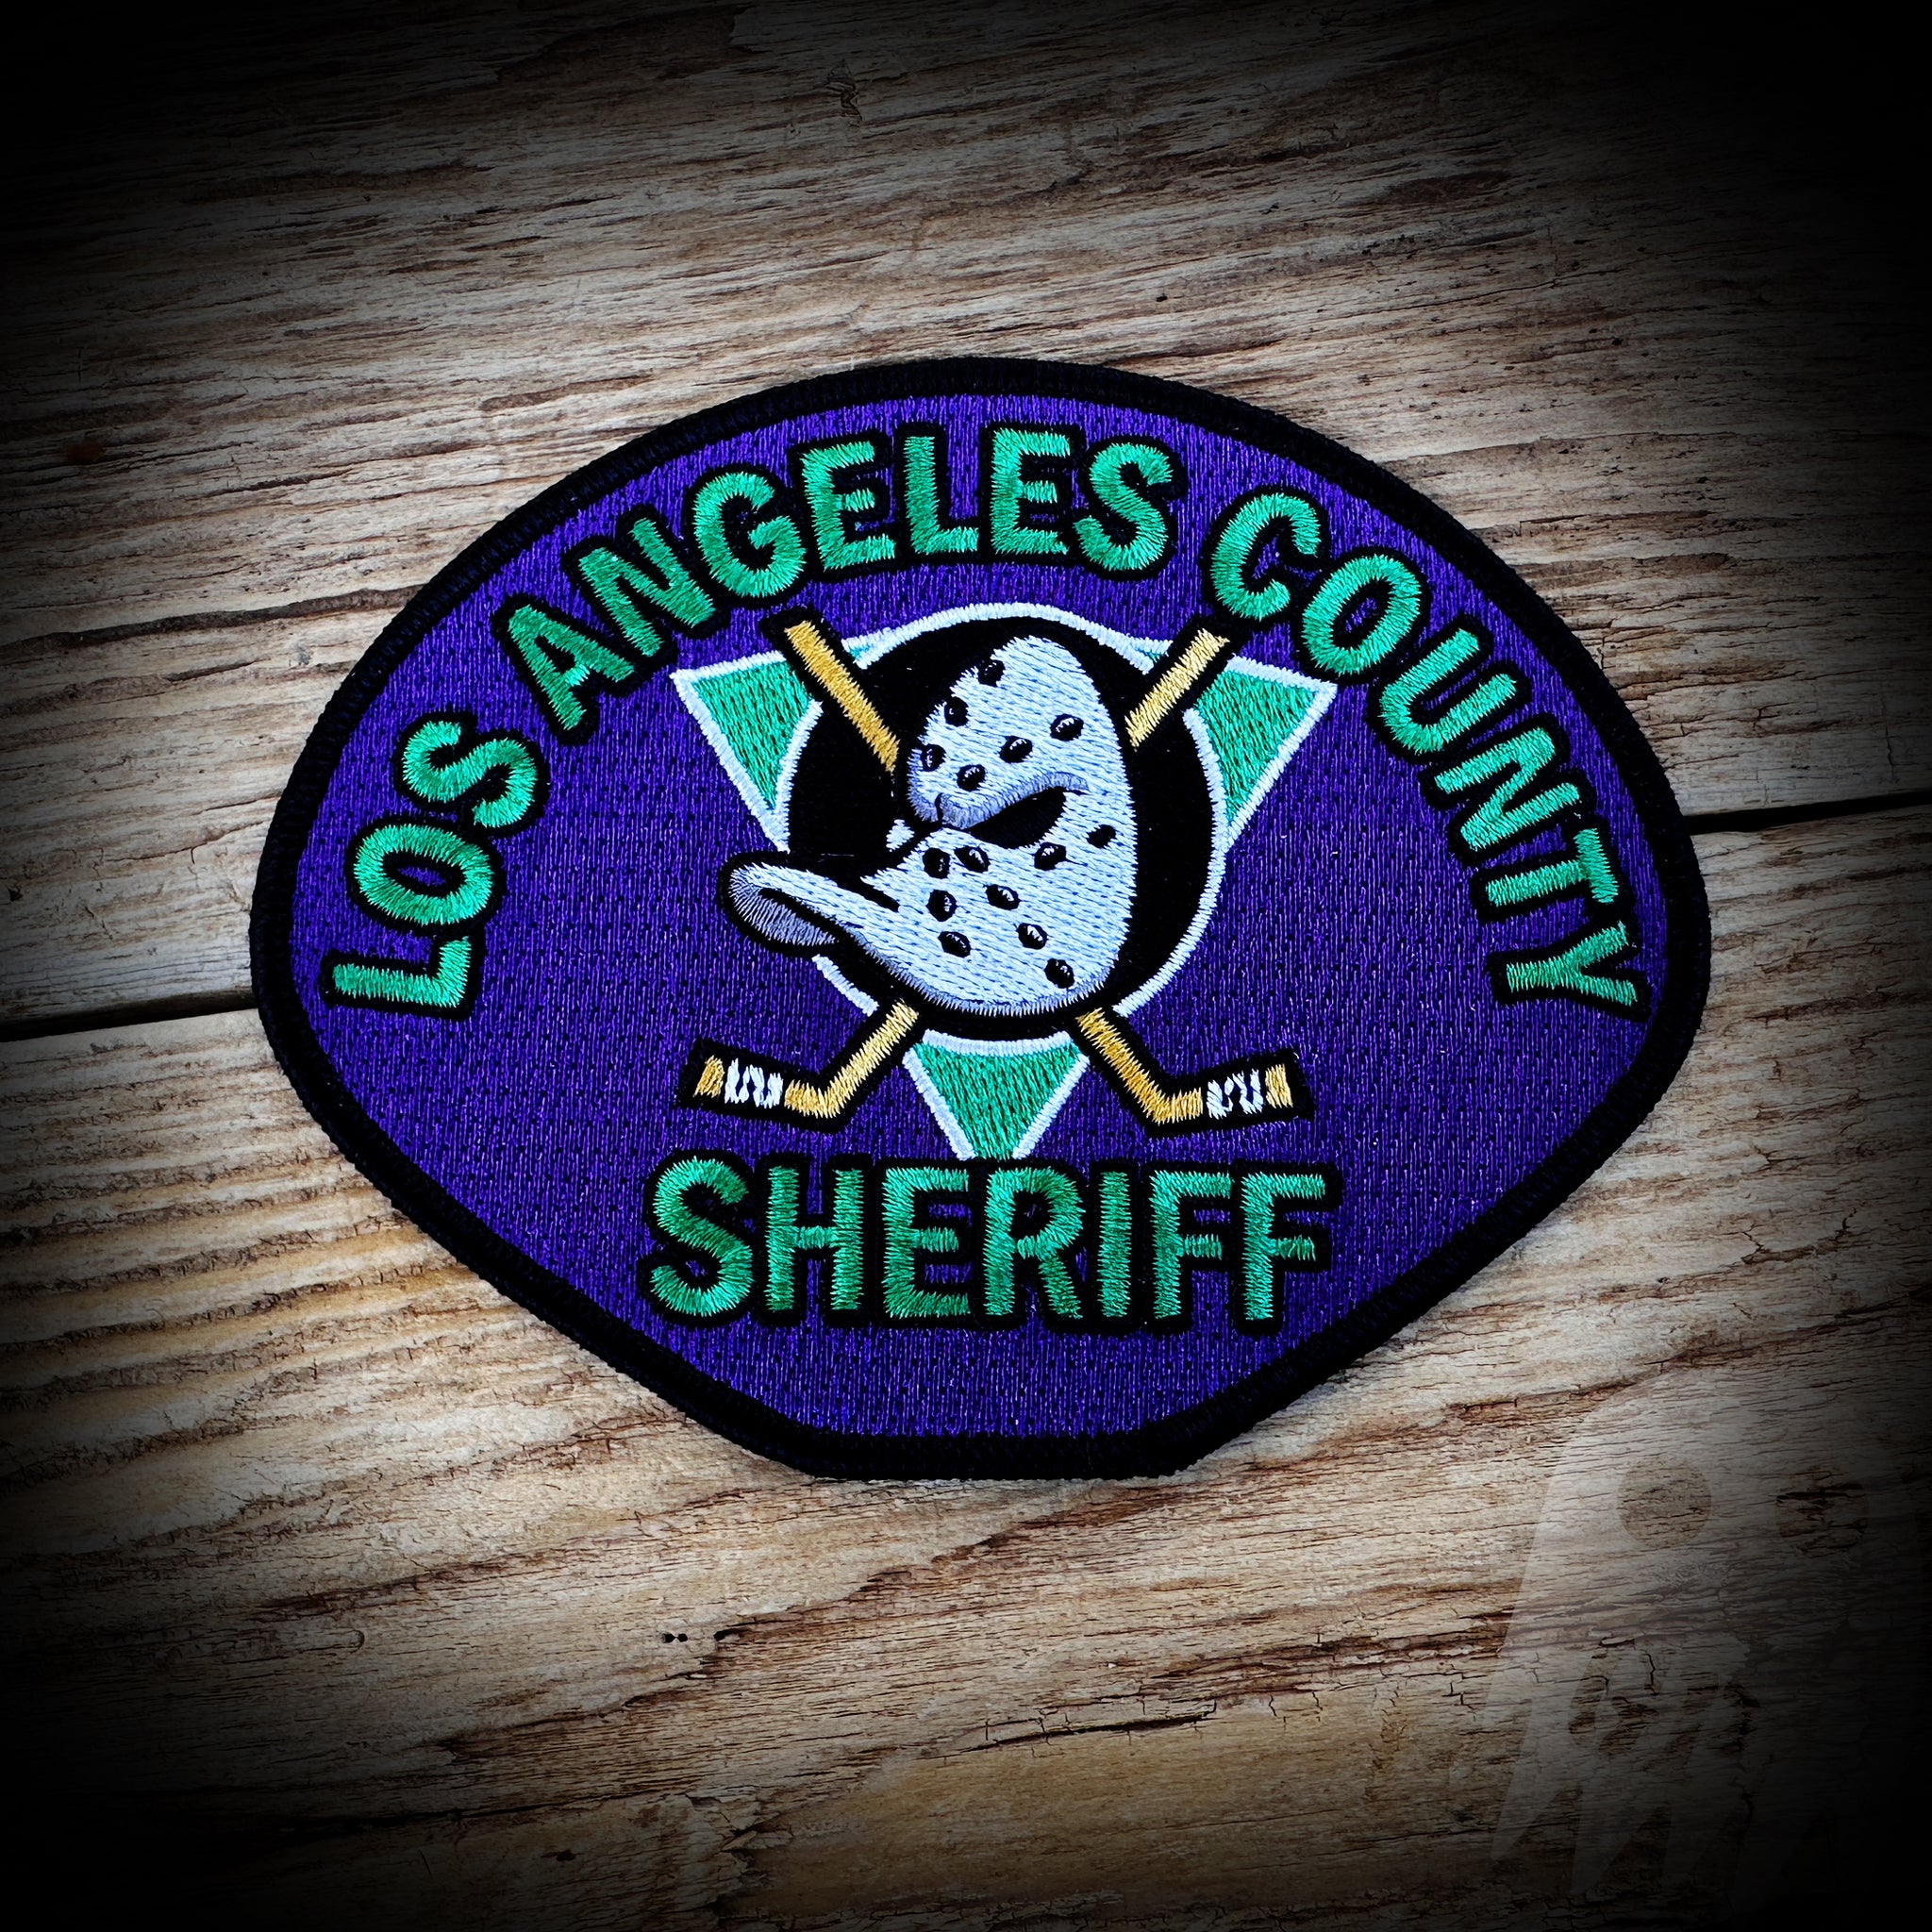 Custom Embroidered Patches in Los Angeles